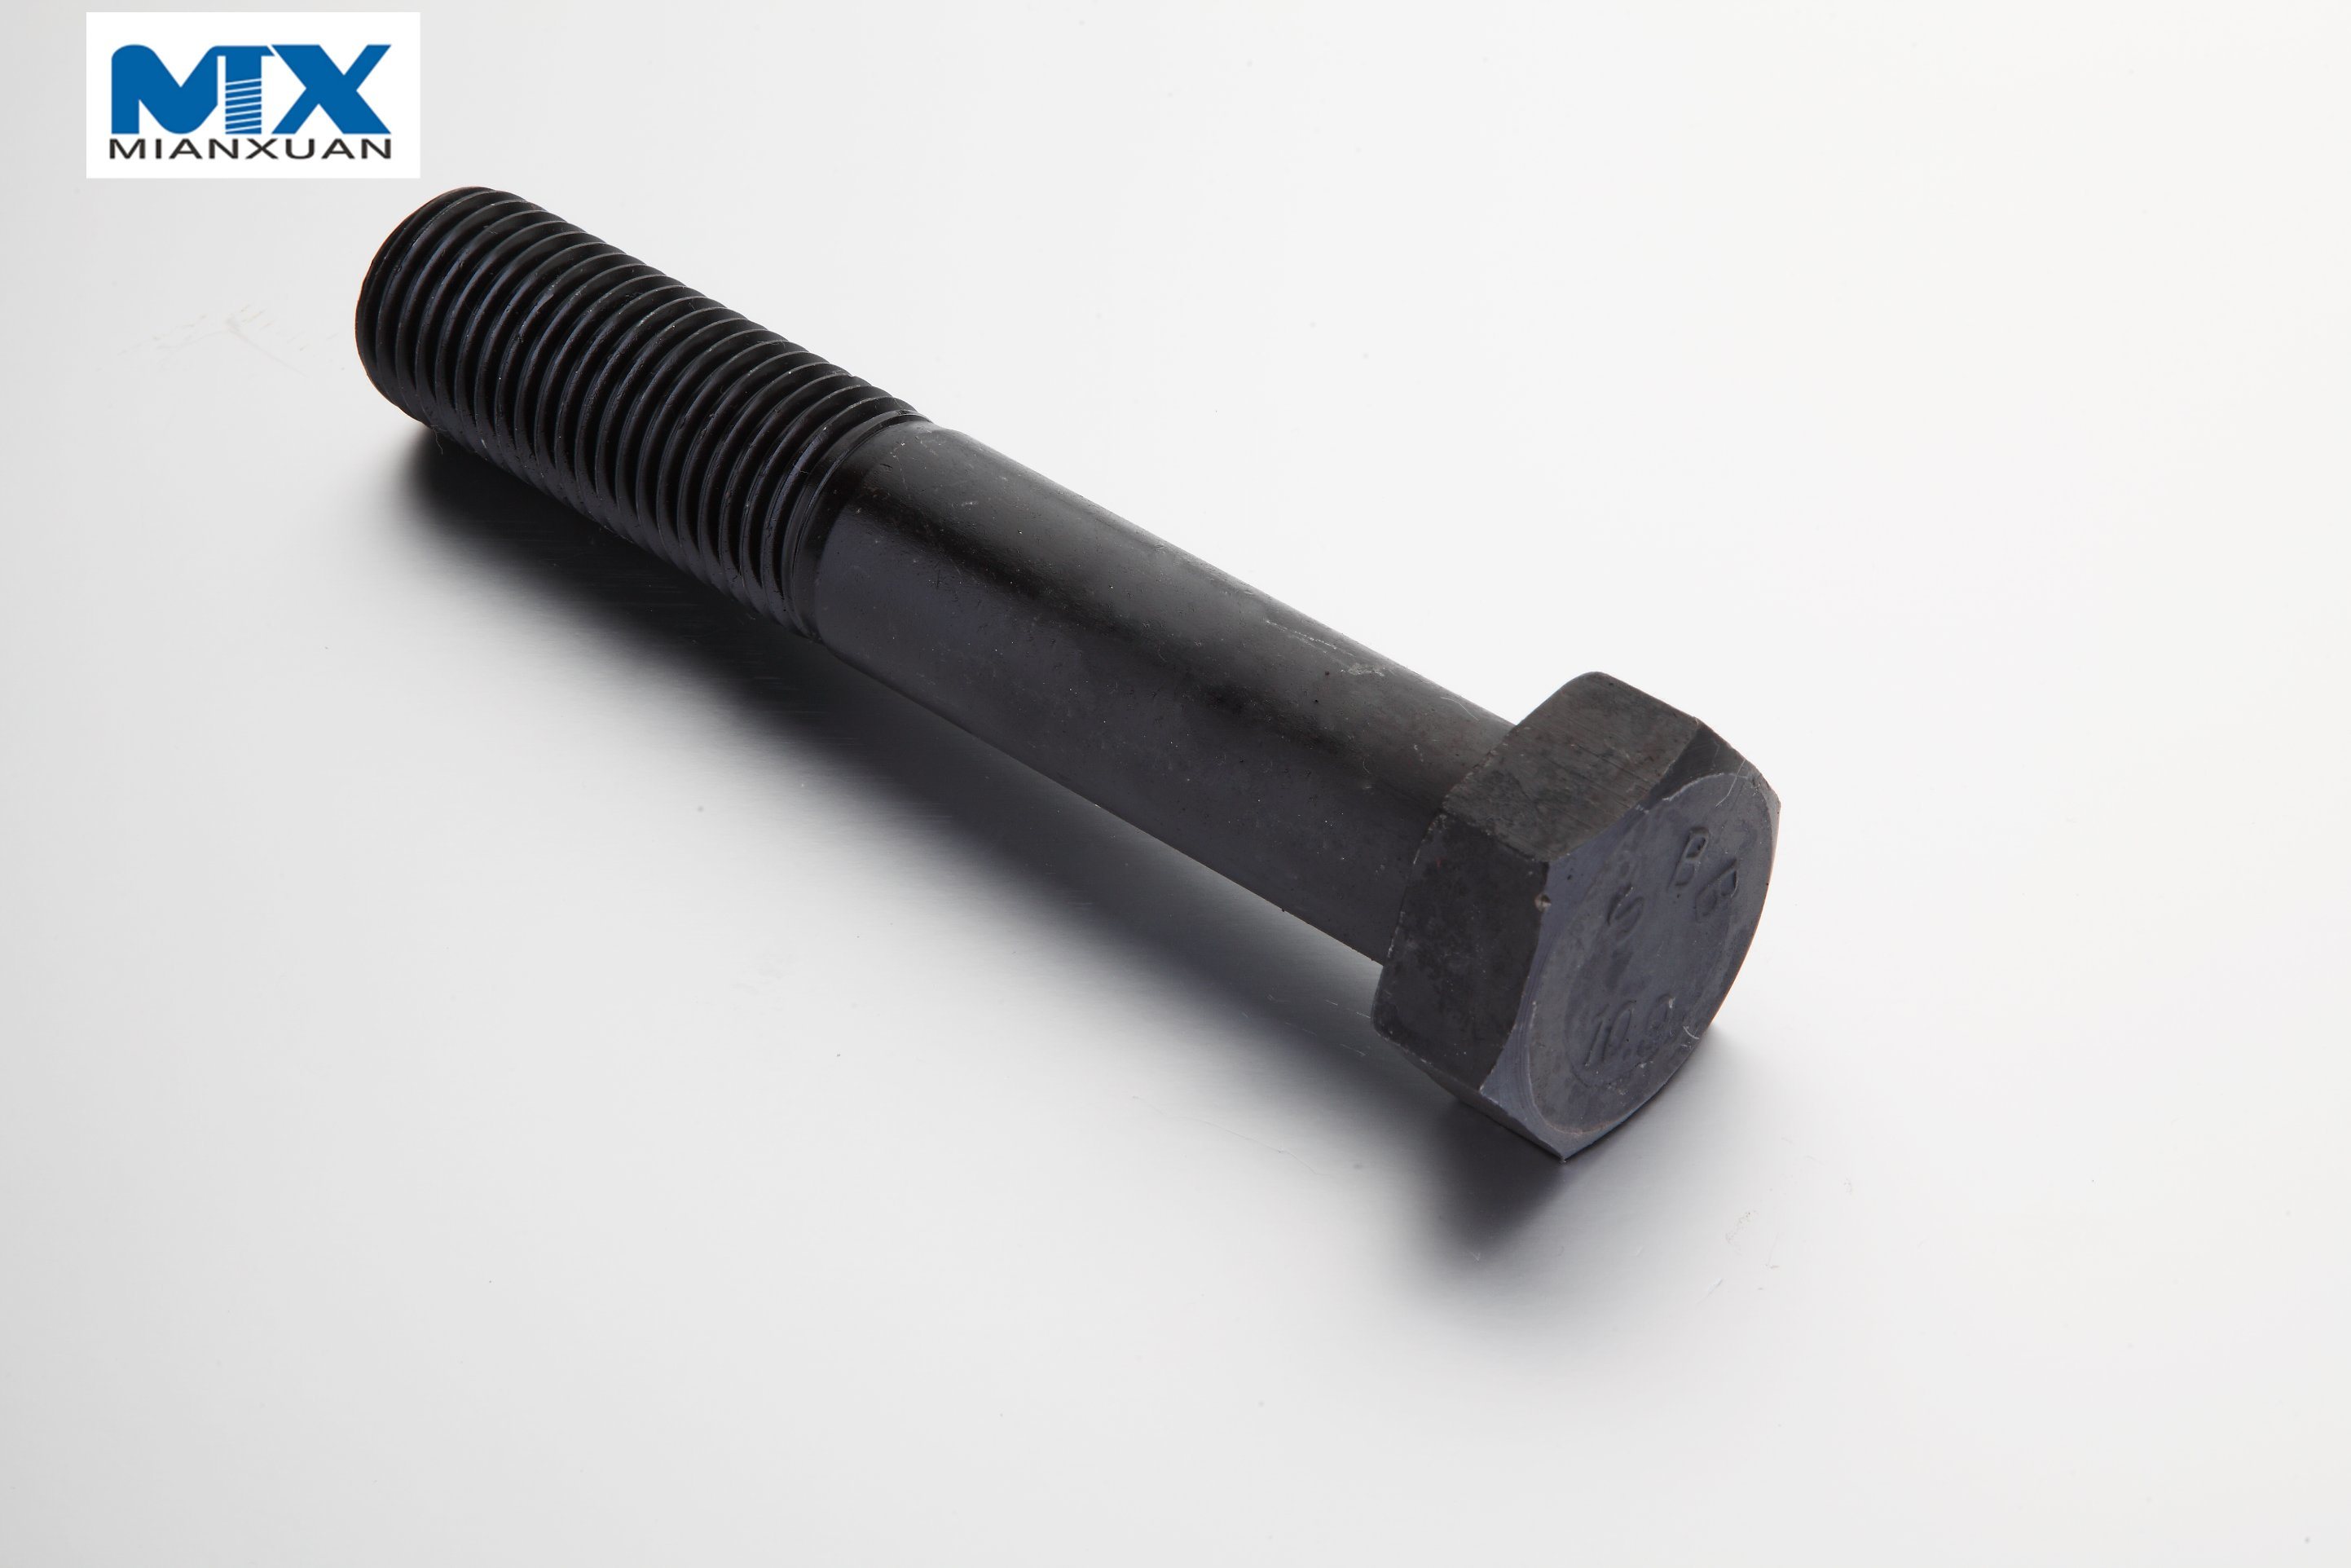 High-Strength Hexagon Bolts with Large Widths Across Flats for Structural Bolting